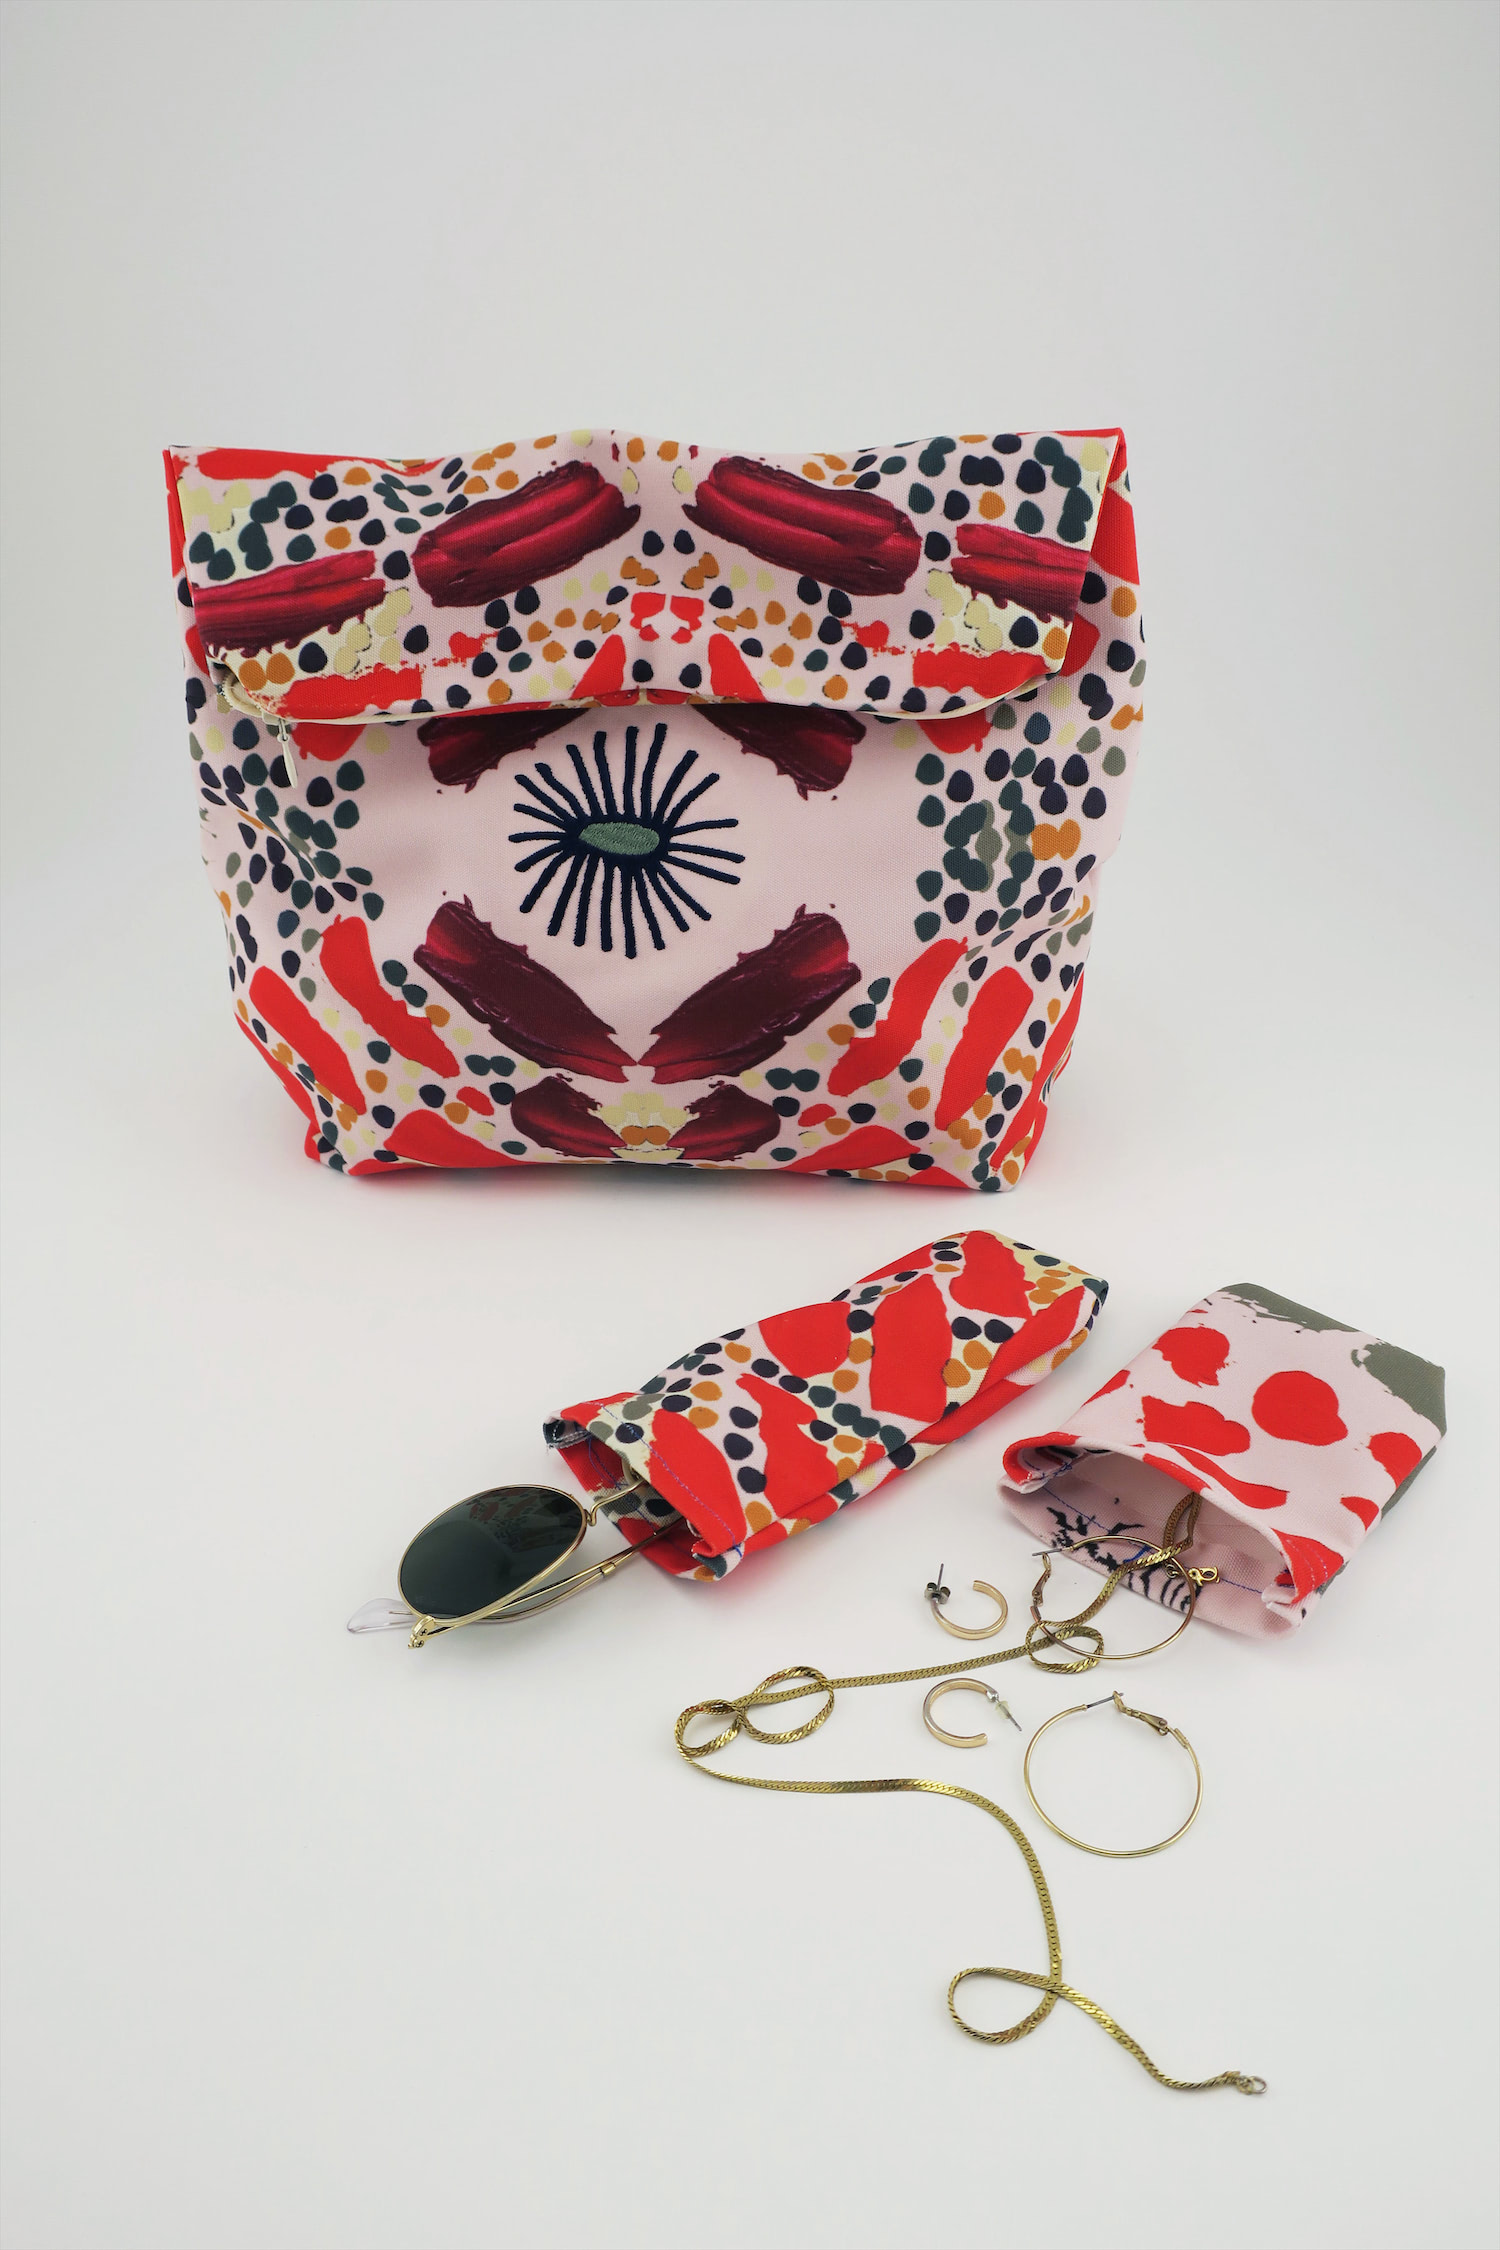 Studio shot of jewelry bags in use with sunglasses, necklaces, and earrings.